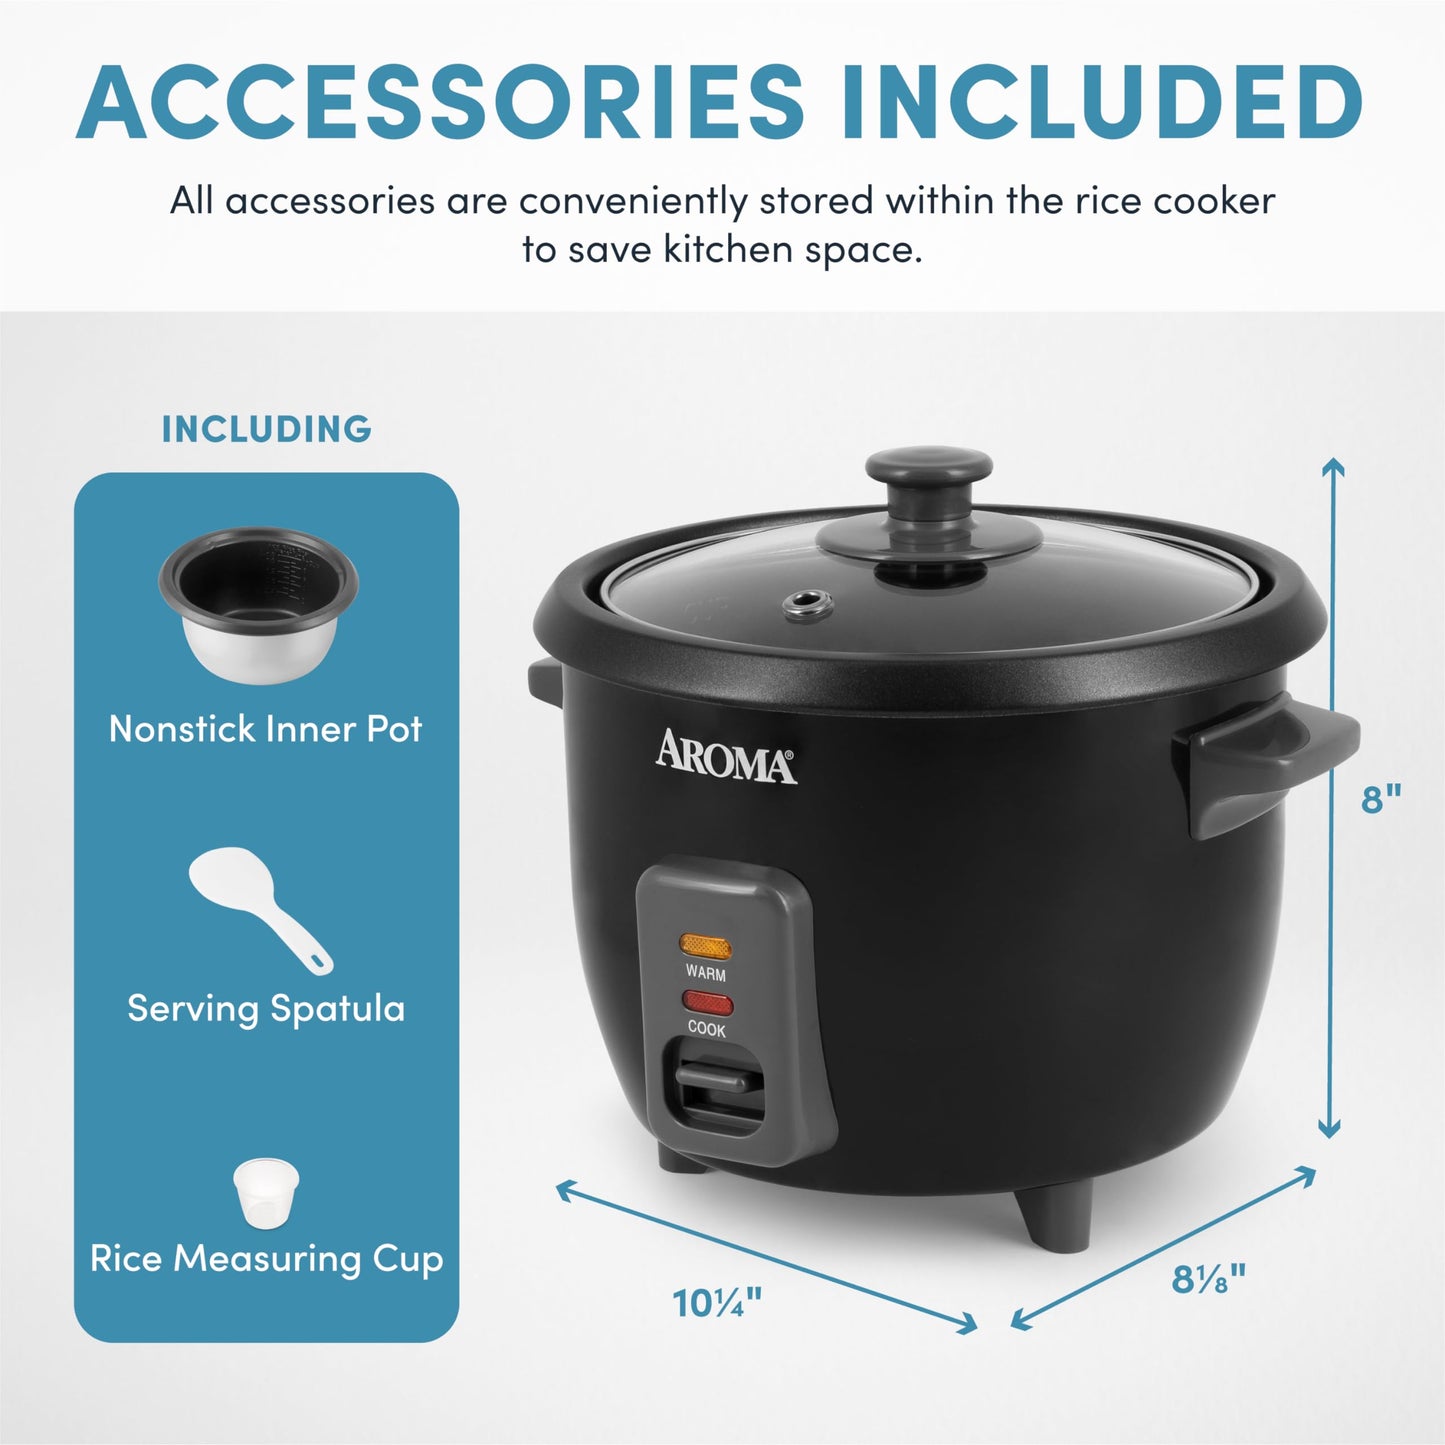 Aroma Housewares 1.5Qt. Rice & Grain Cooker (ARC-363NGB),Black,6-Cup Cooked / 3-Cup Uncooked